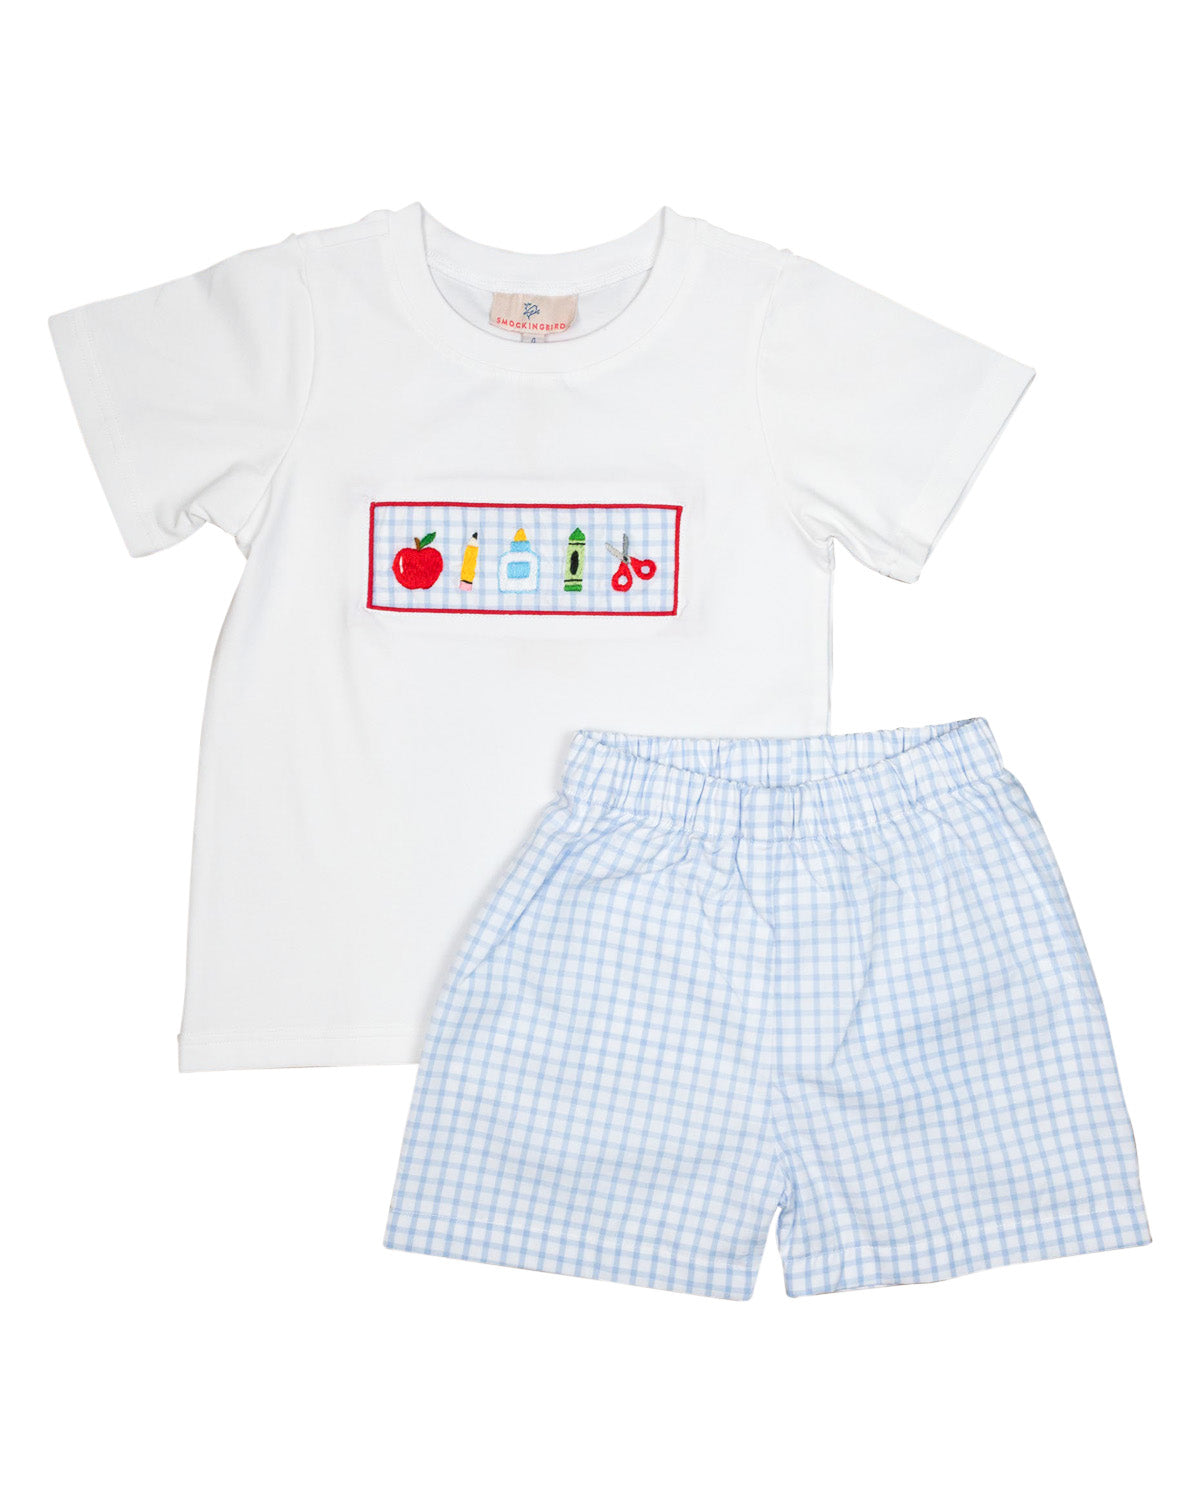 School Supplies Embroidered Shorts Set